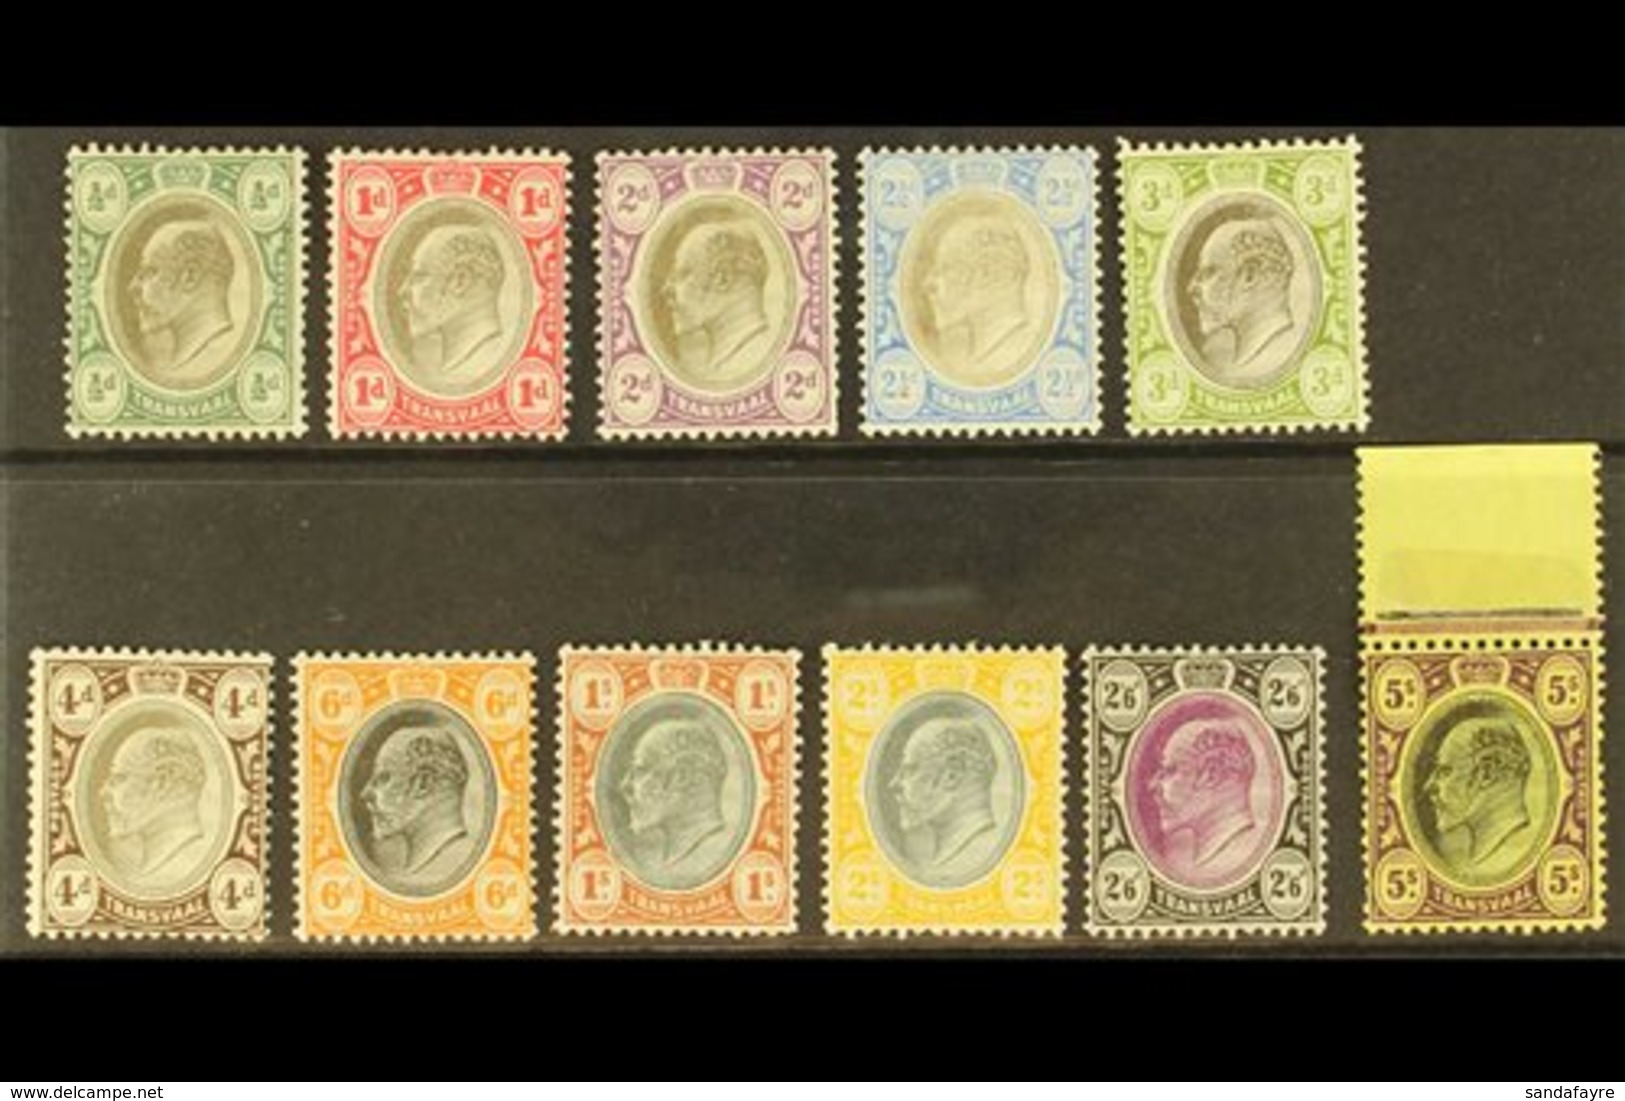 TRANSVAAL 1904-09 Set To 5s, SG 260/270, Very Fine Mint, The 5s Nhm. (11 Stamps) For More Images, Please Visit Http://ww - Unclassified